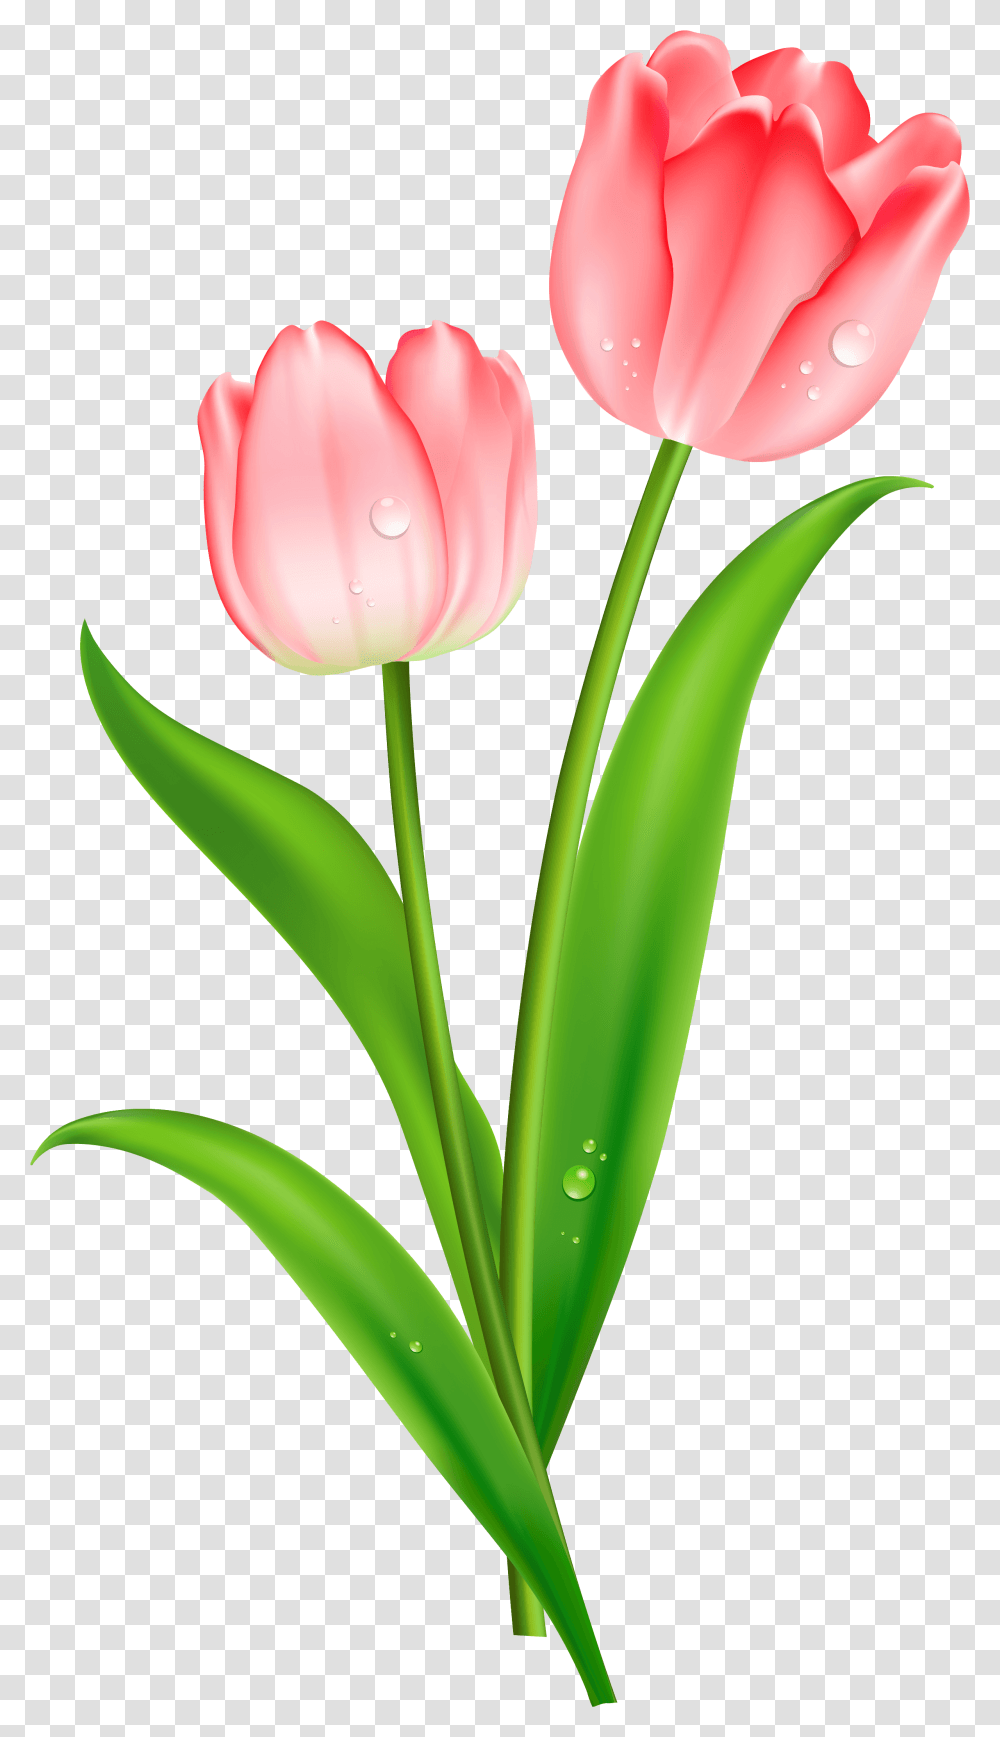 Red Tulips Clipart Single Pink Tulips Flowers, Plant, Blossom, Petal, Leaf Transparent Png